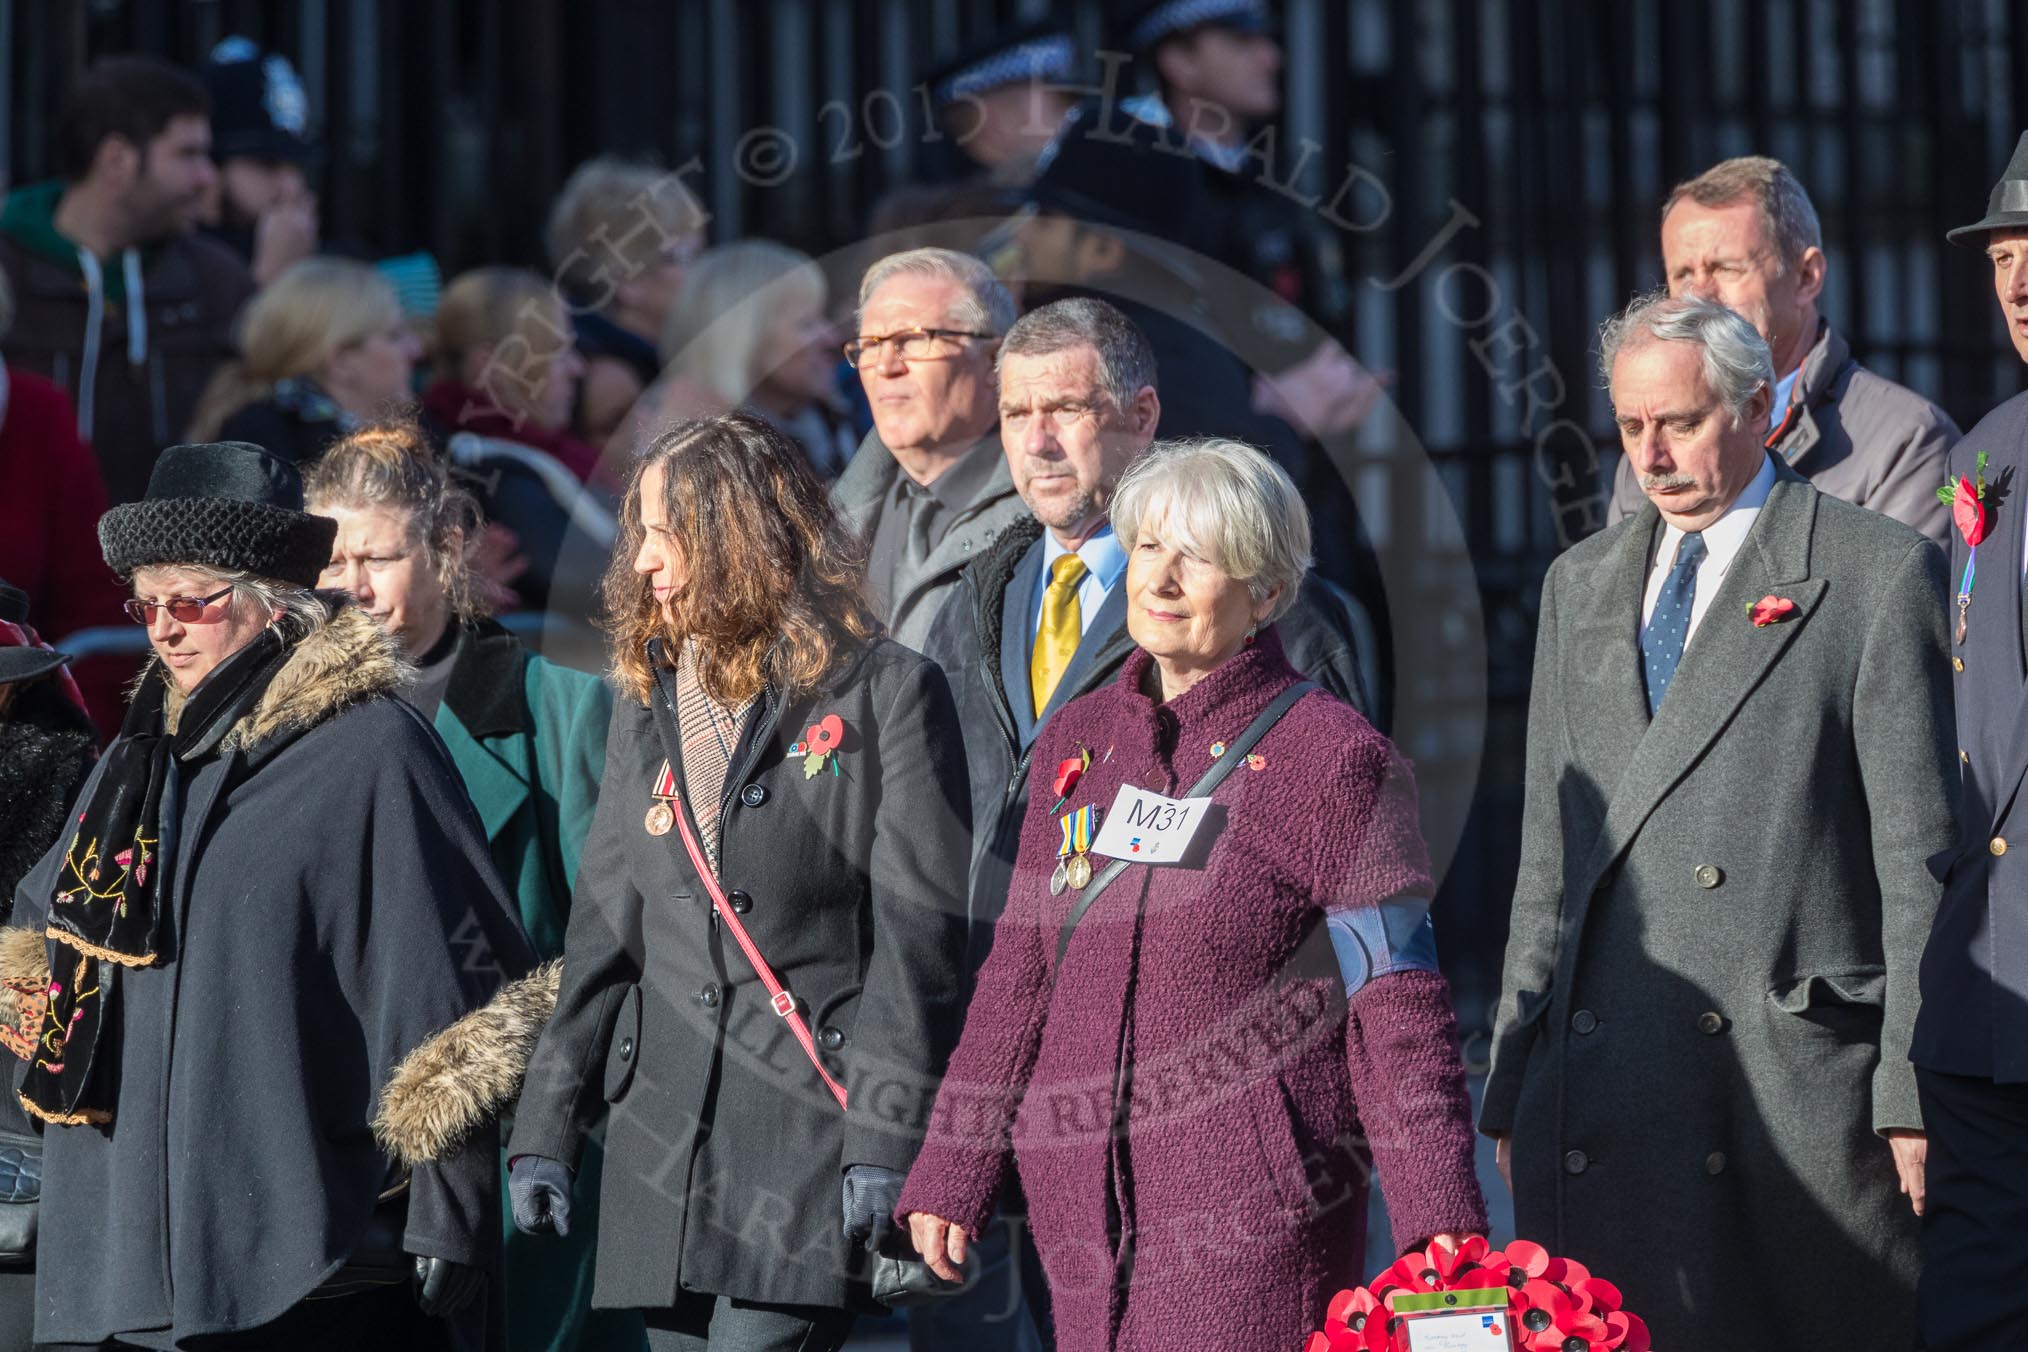 March Past, Remembrance Sunday at the Cenotaph 2016: M31 Romany & Traveller Society.
Cenotaph, Whitehall, London SW1,
London,
Greater London,
United Kingdom,
on 13 November 2016 at 13:17, image #2776